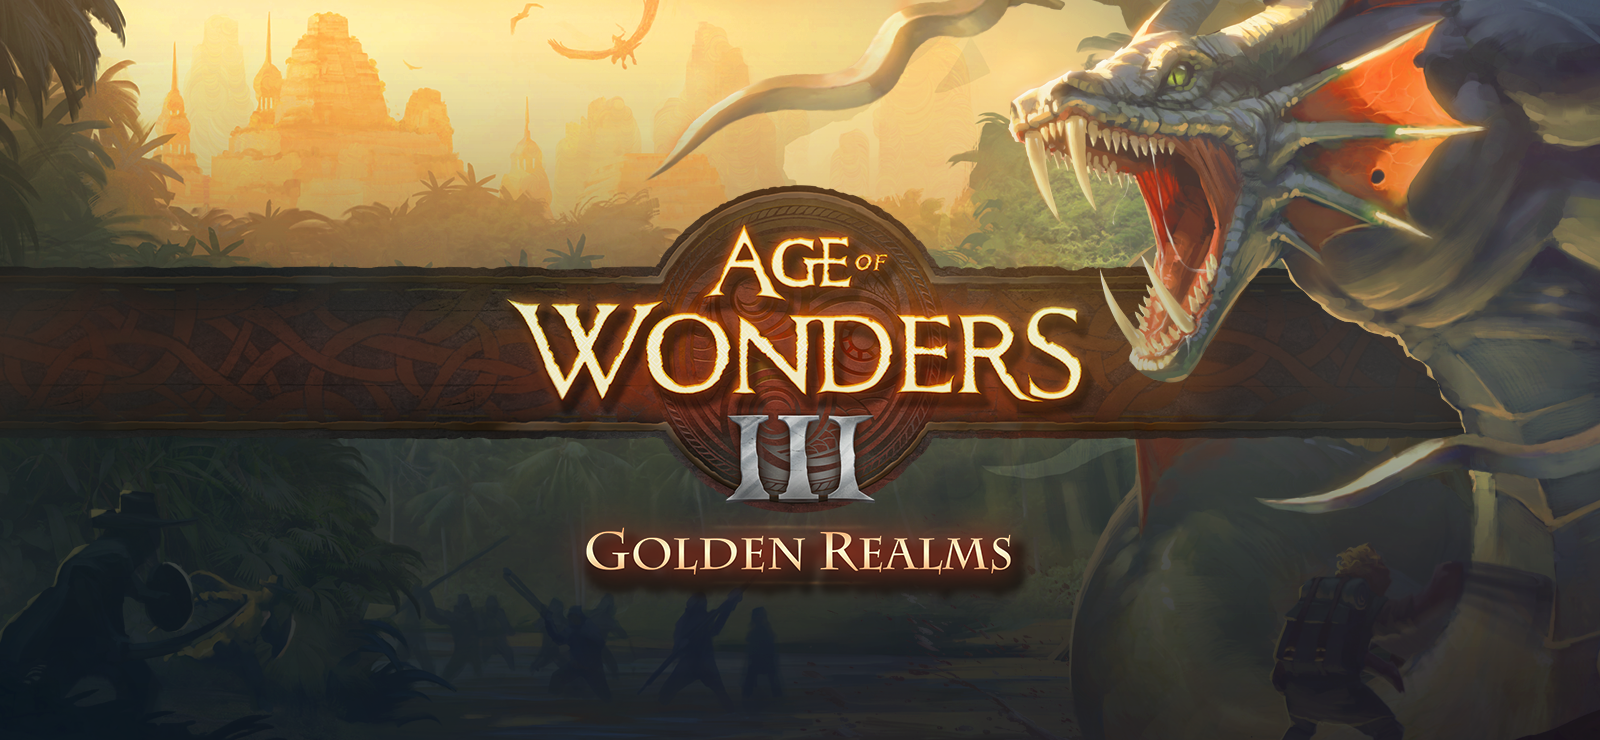 Age Of Wonders 3 - Golden Realms